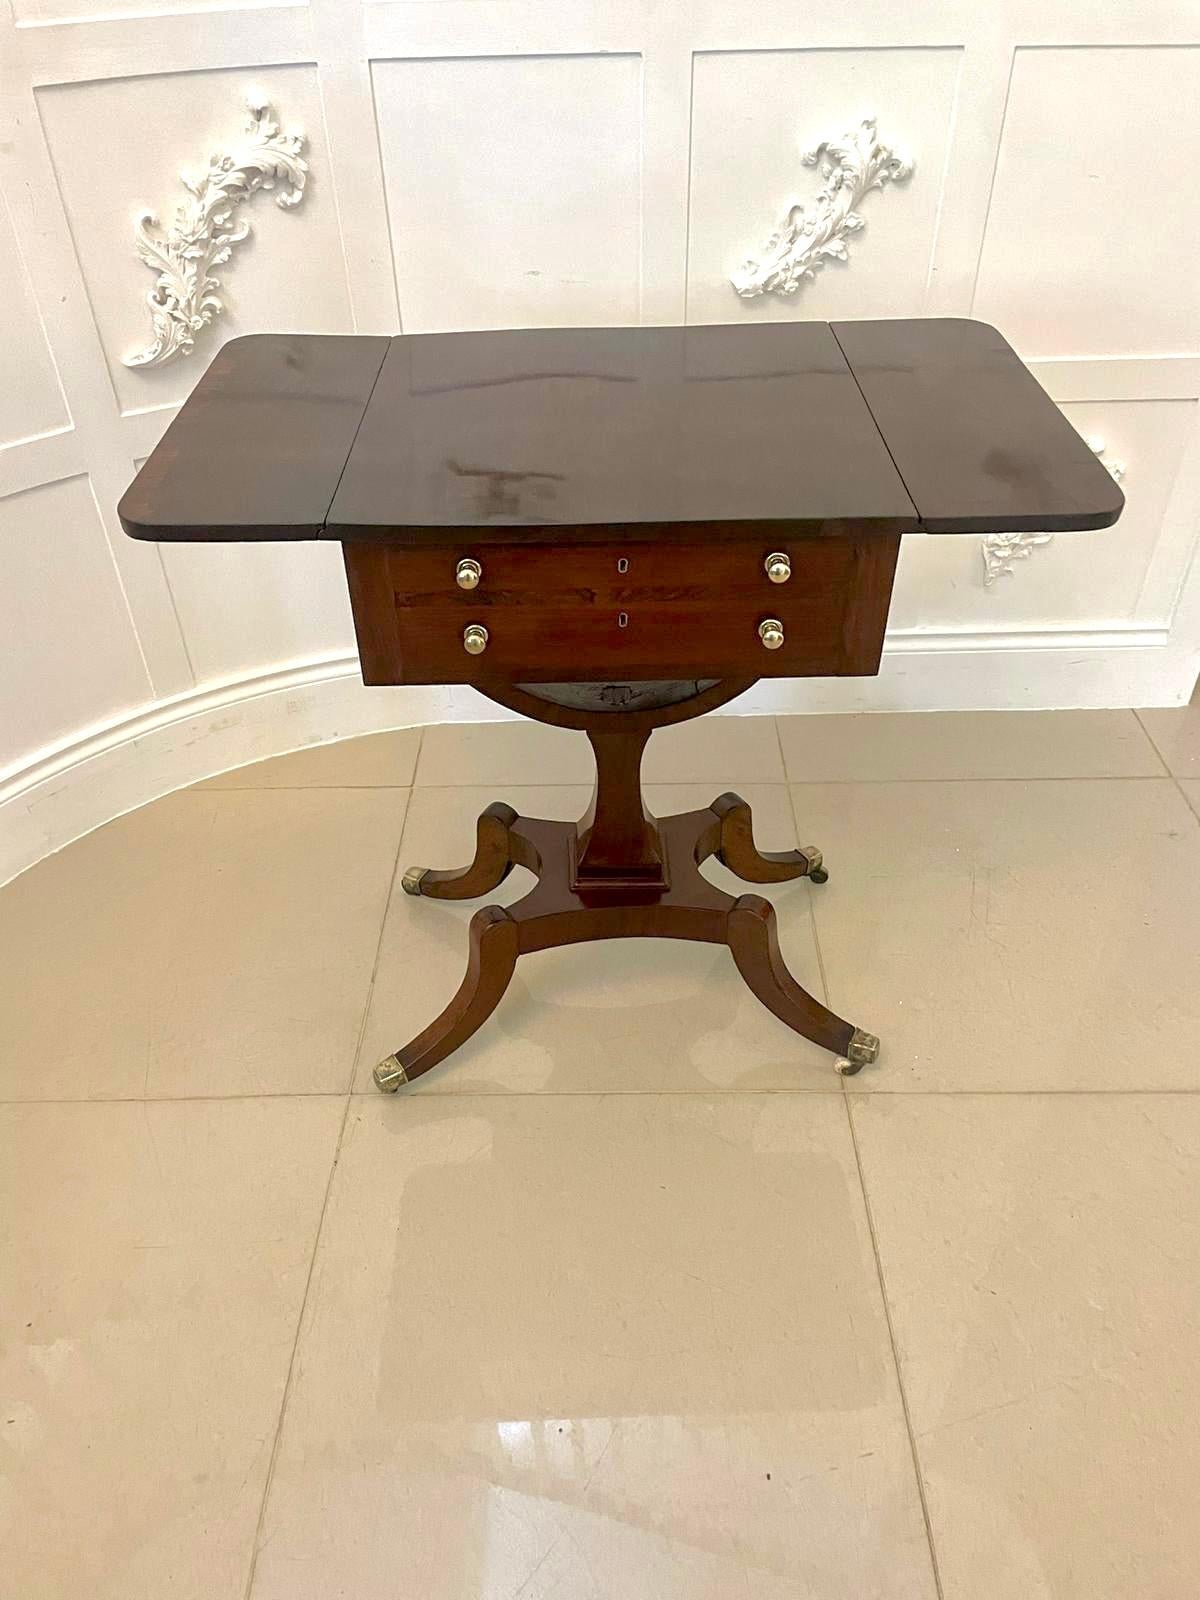 19th Century Superb Quality Antique Regency Freestanding Mahogany Sewing/Side Table For Sale